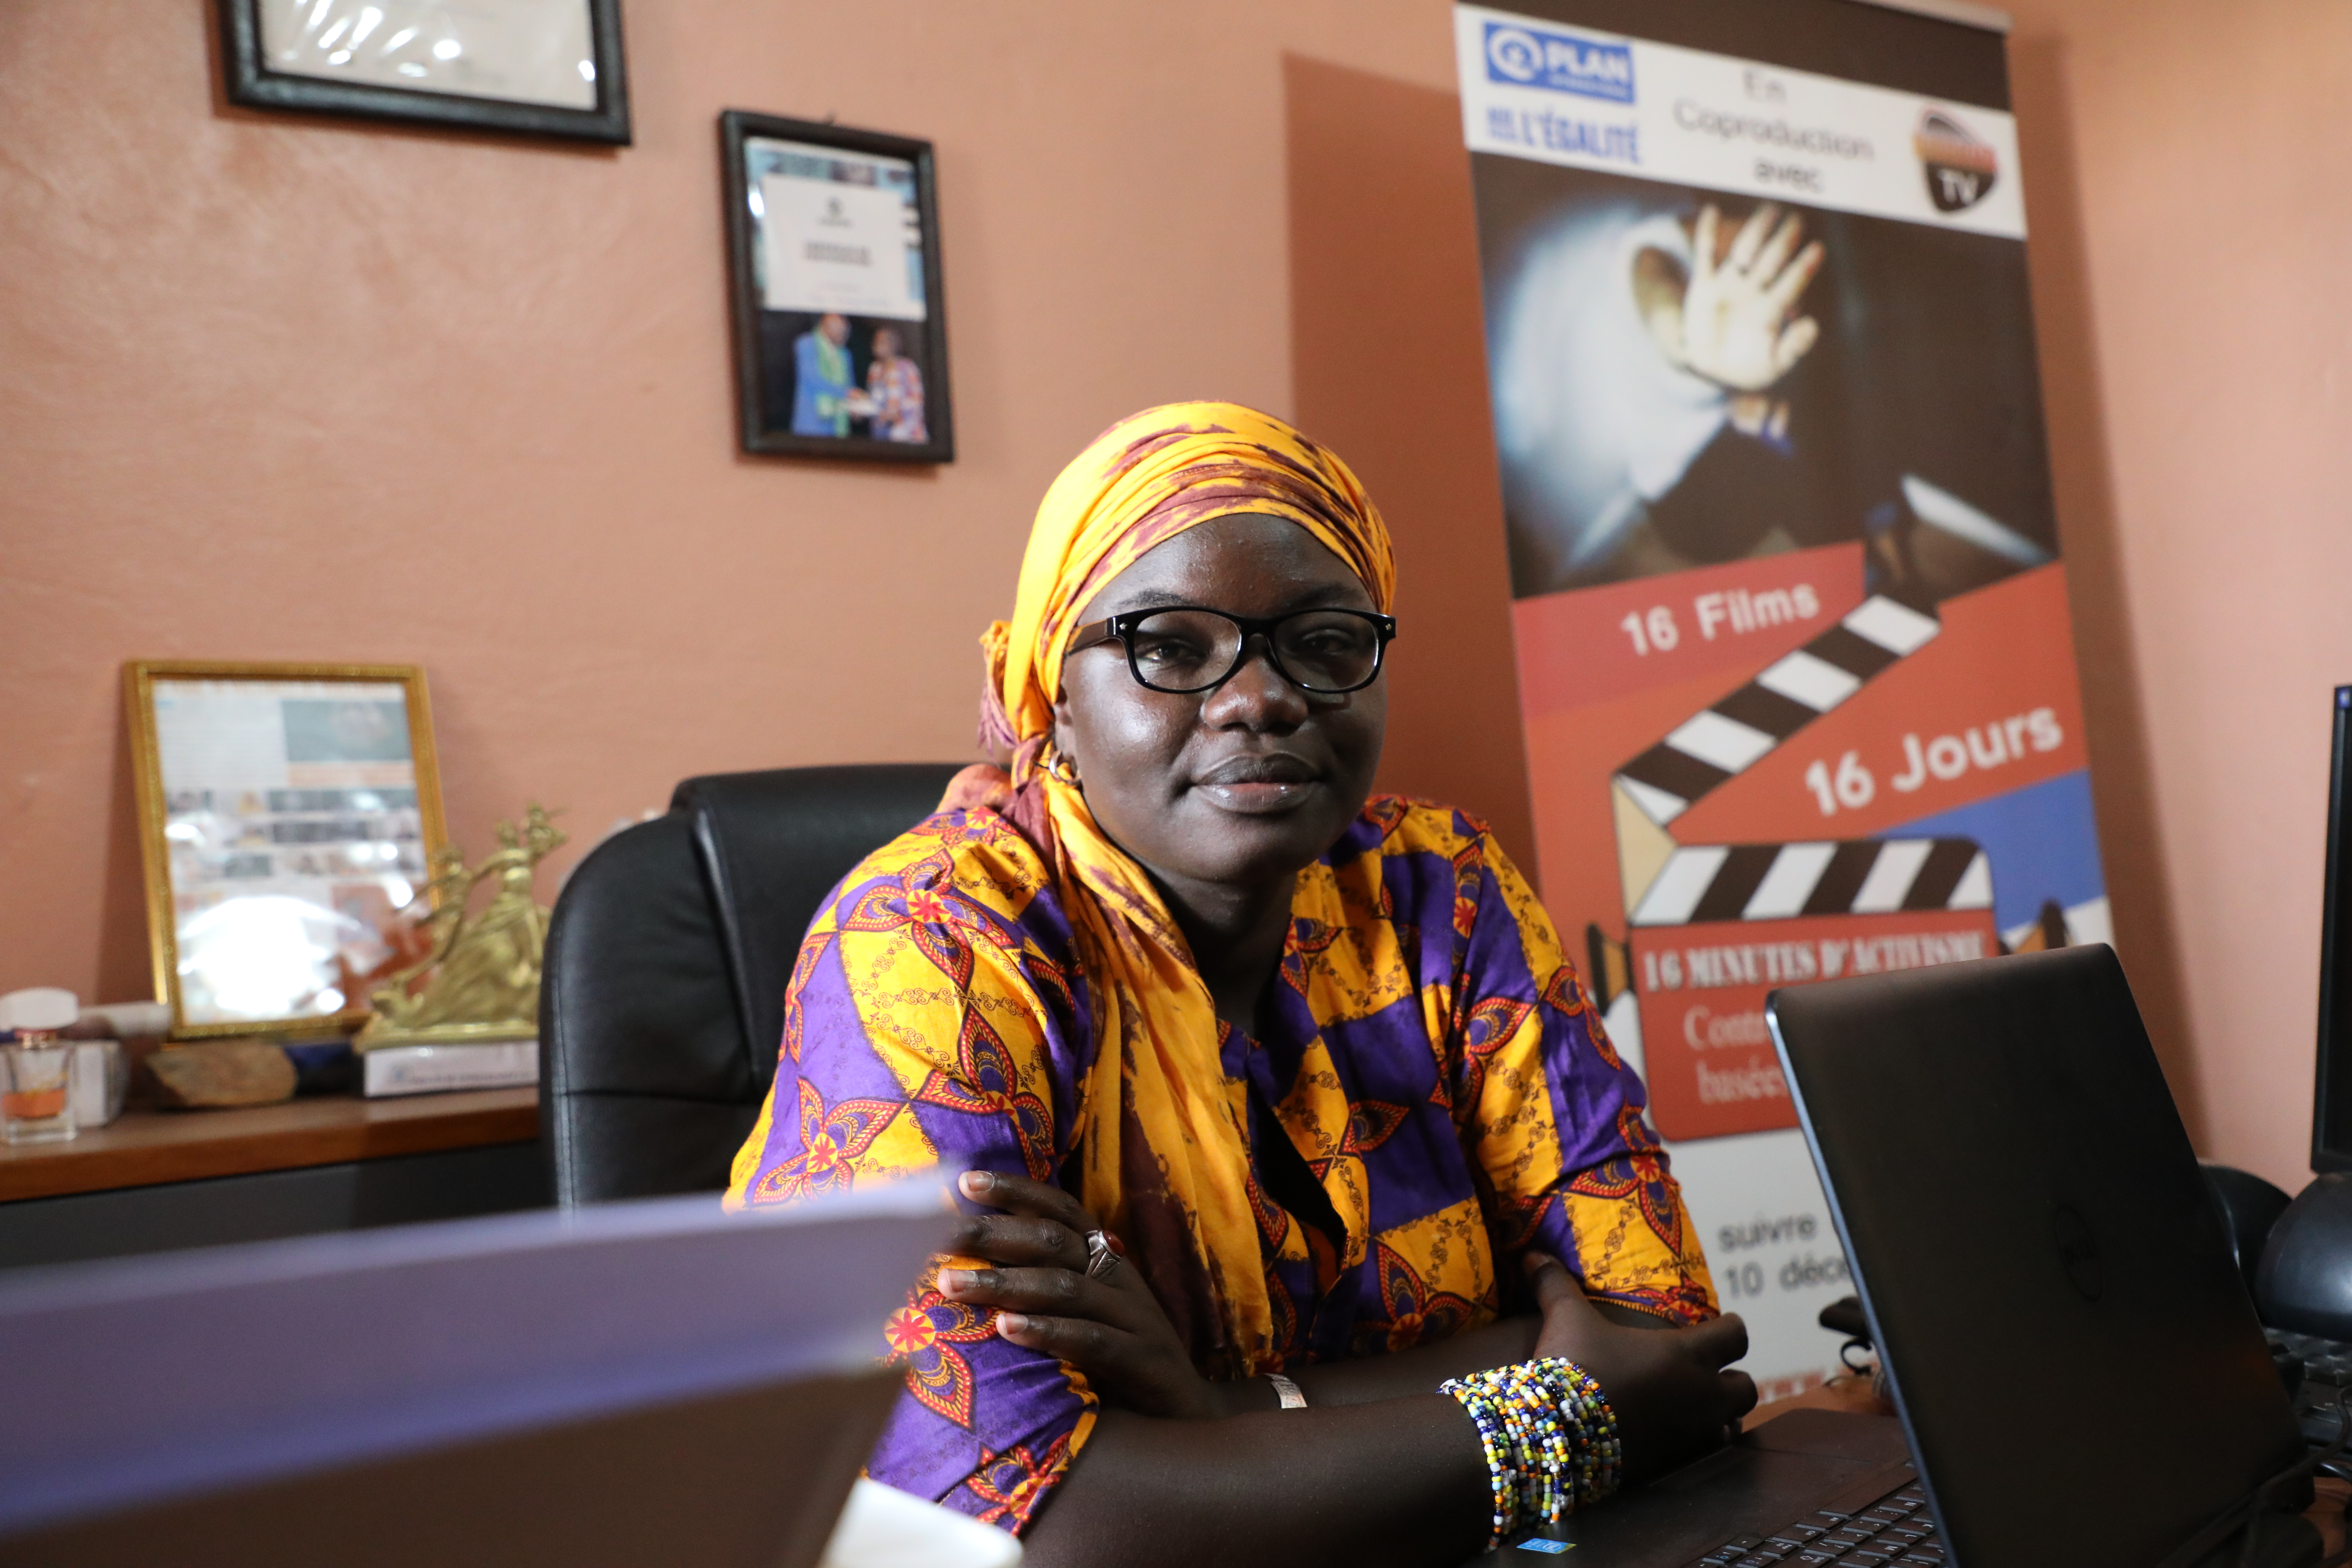 Fatou Warkha Sambe is a 30-year old video-journalist who founded a web TV amplifying the voices of vulnerable women in Senegal. Credit: UN Women/Khadidiatou Ndiaye